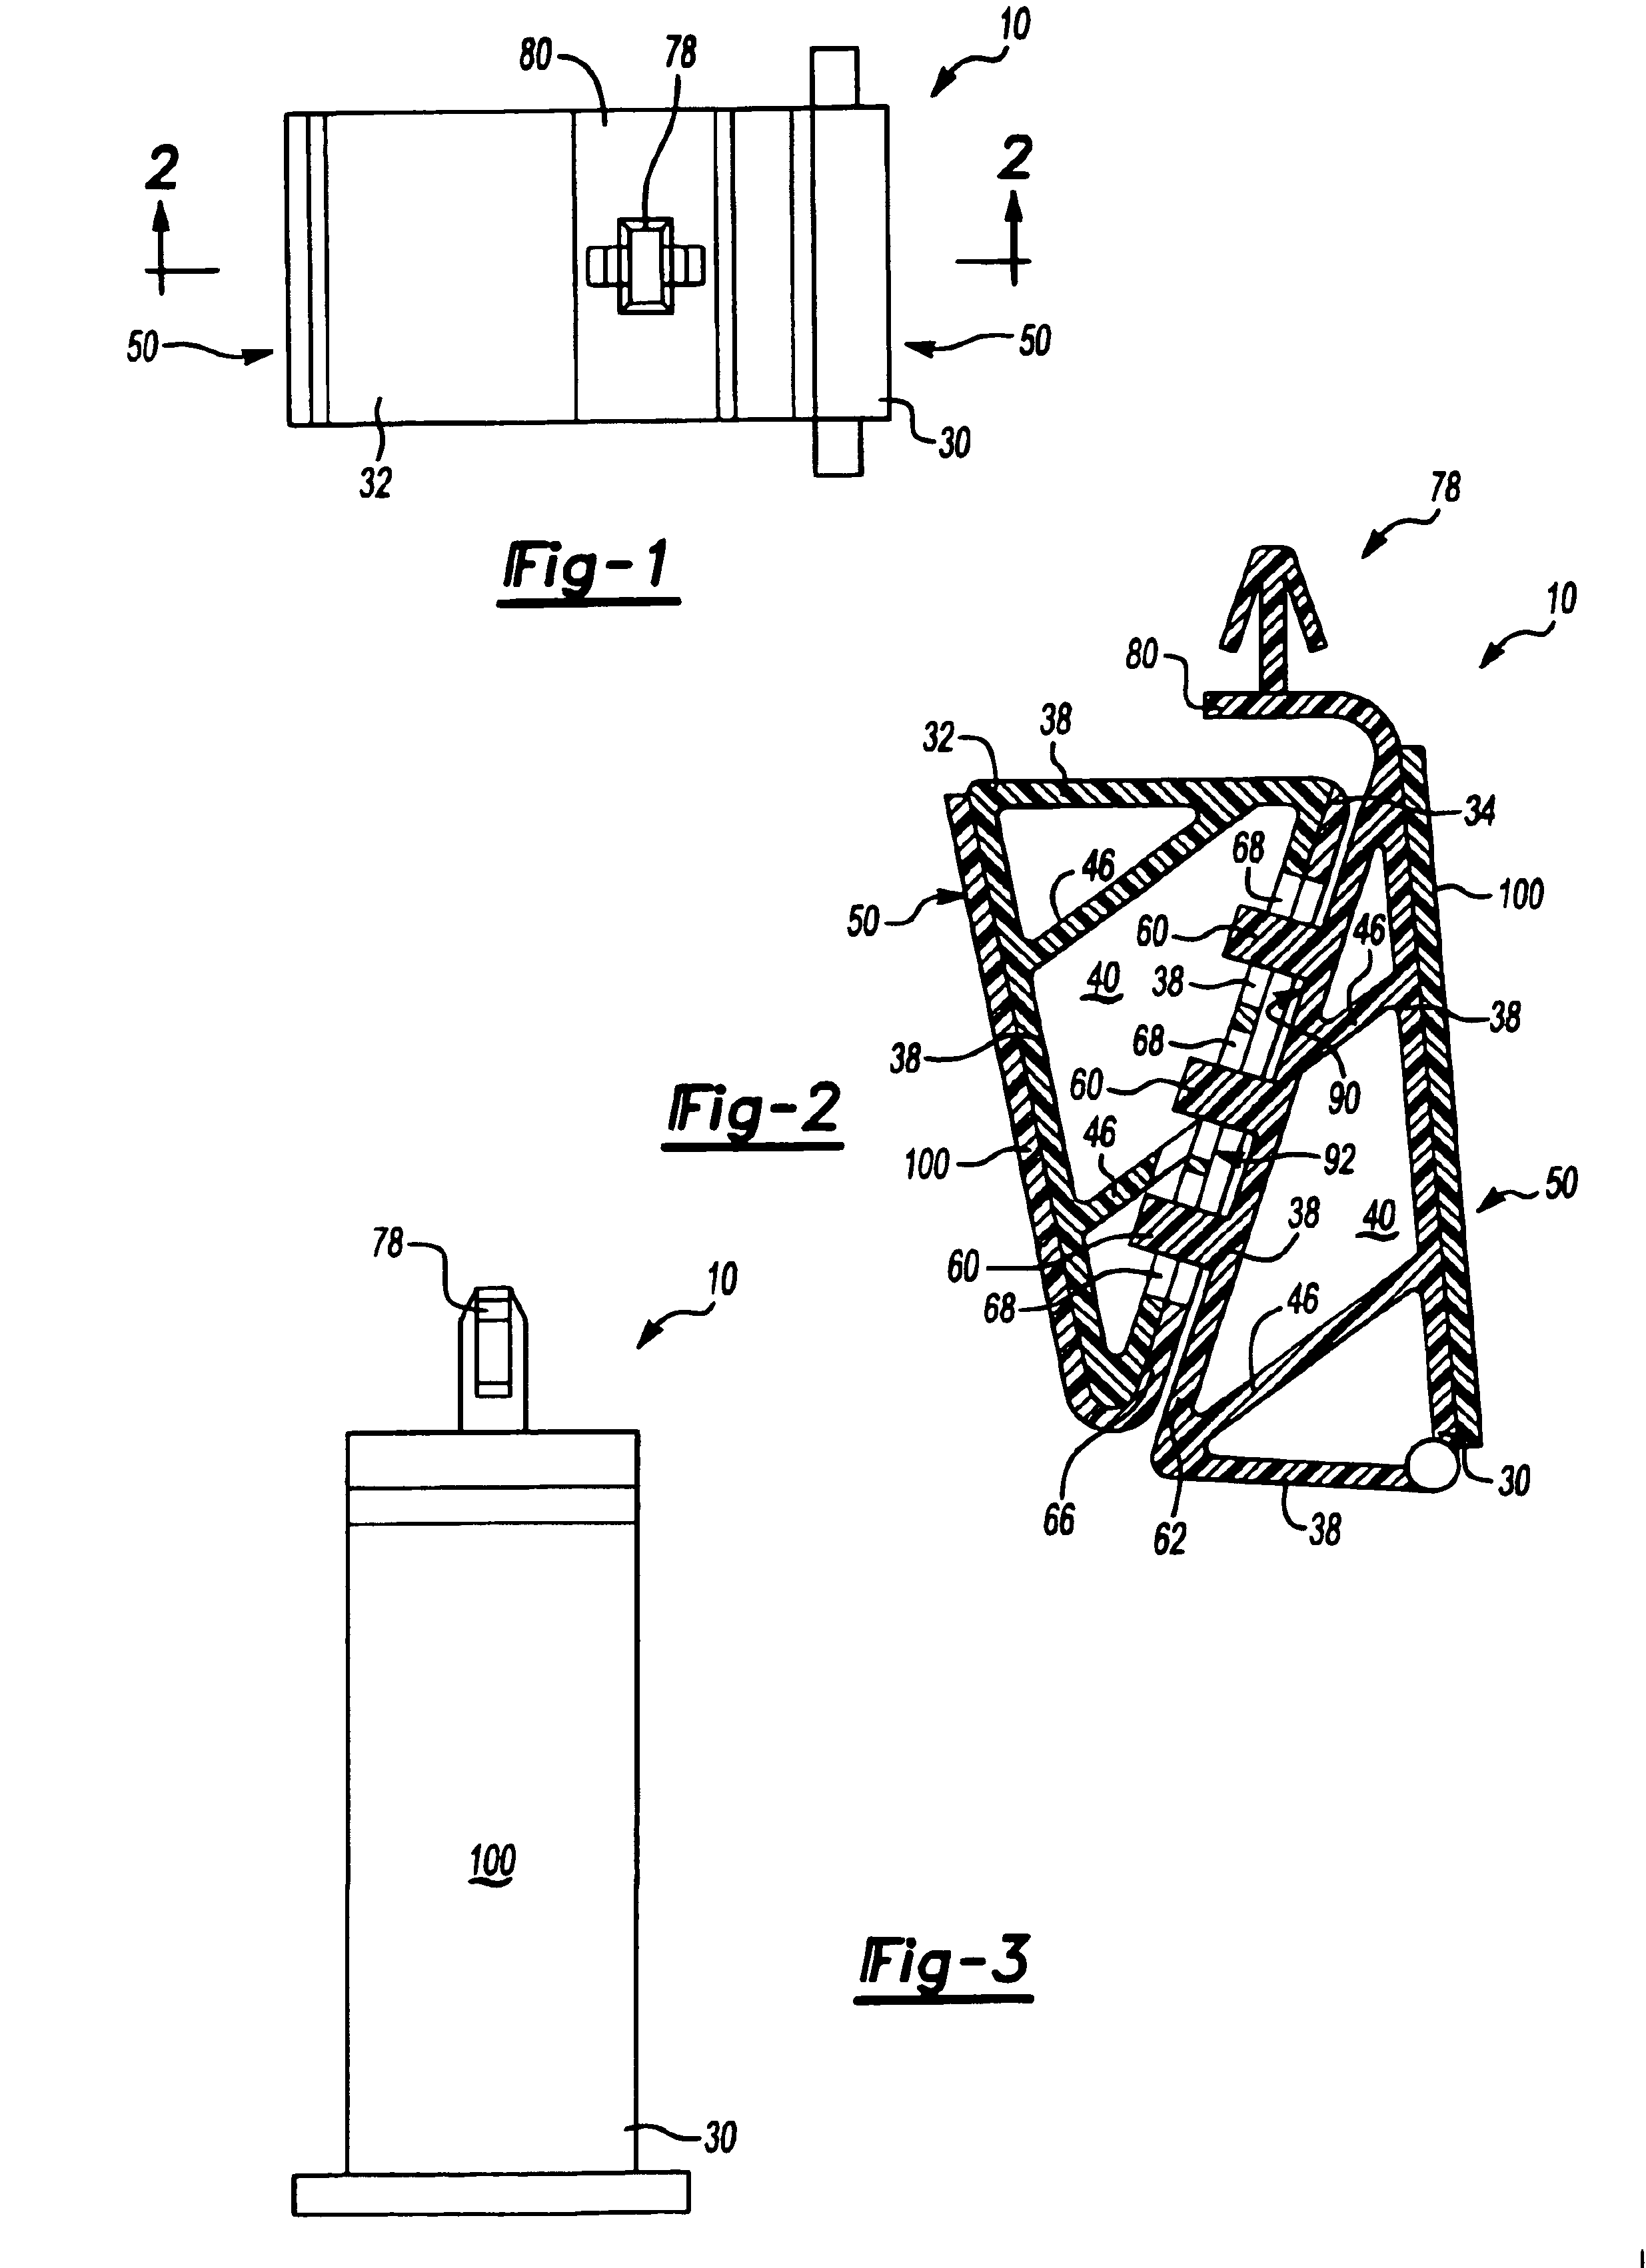 Adjustable reinforced structural assembly and method of use therefor